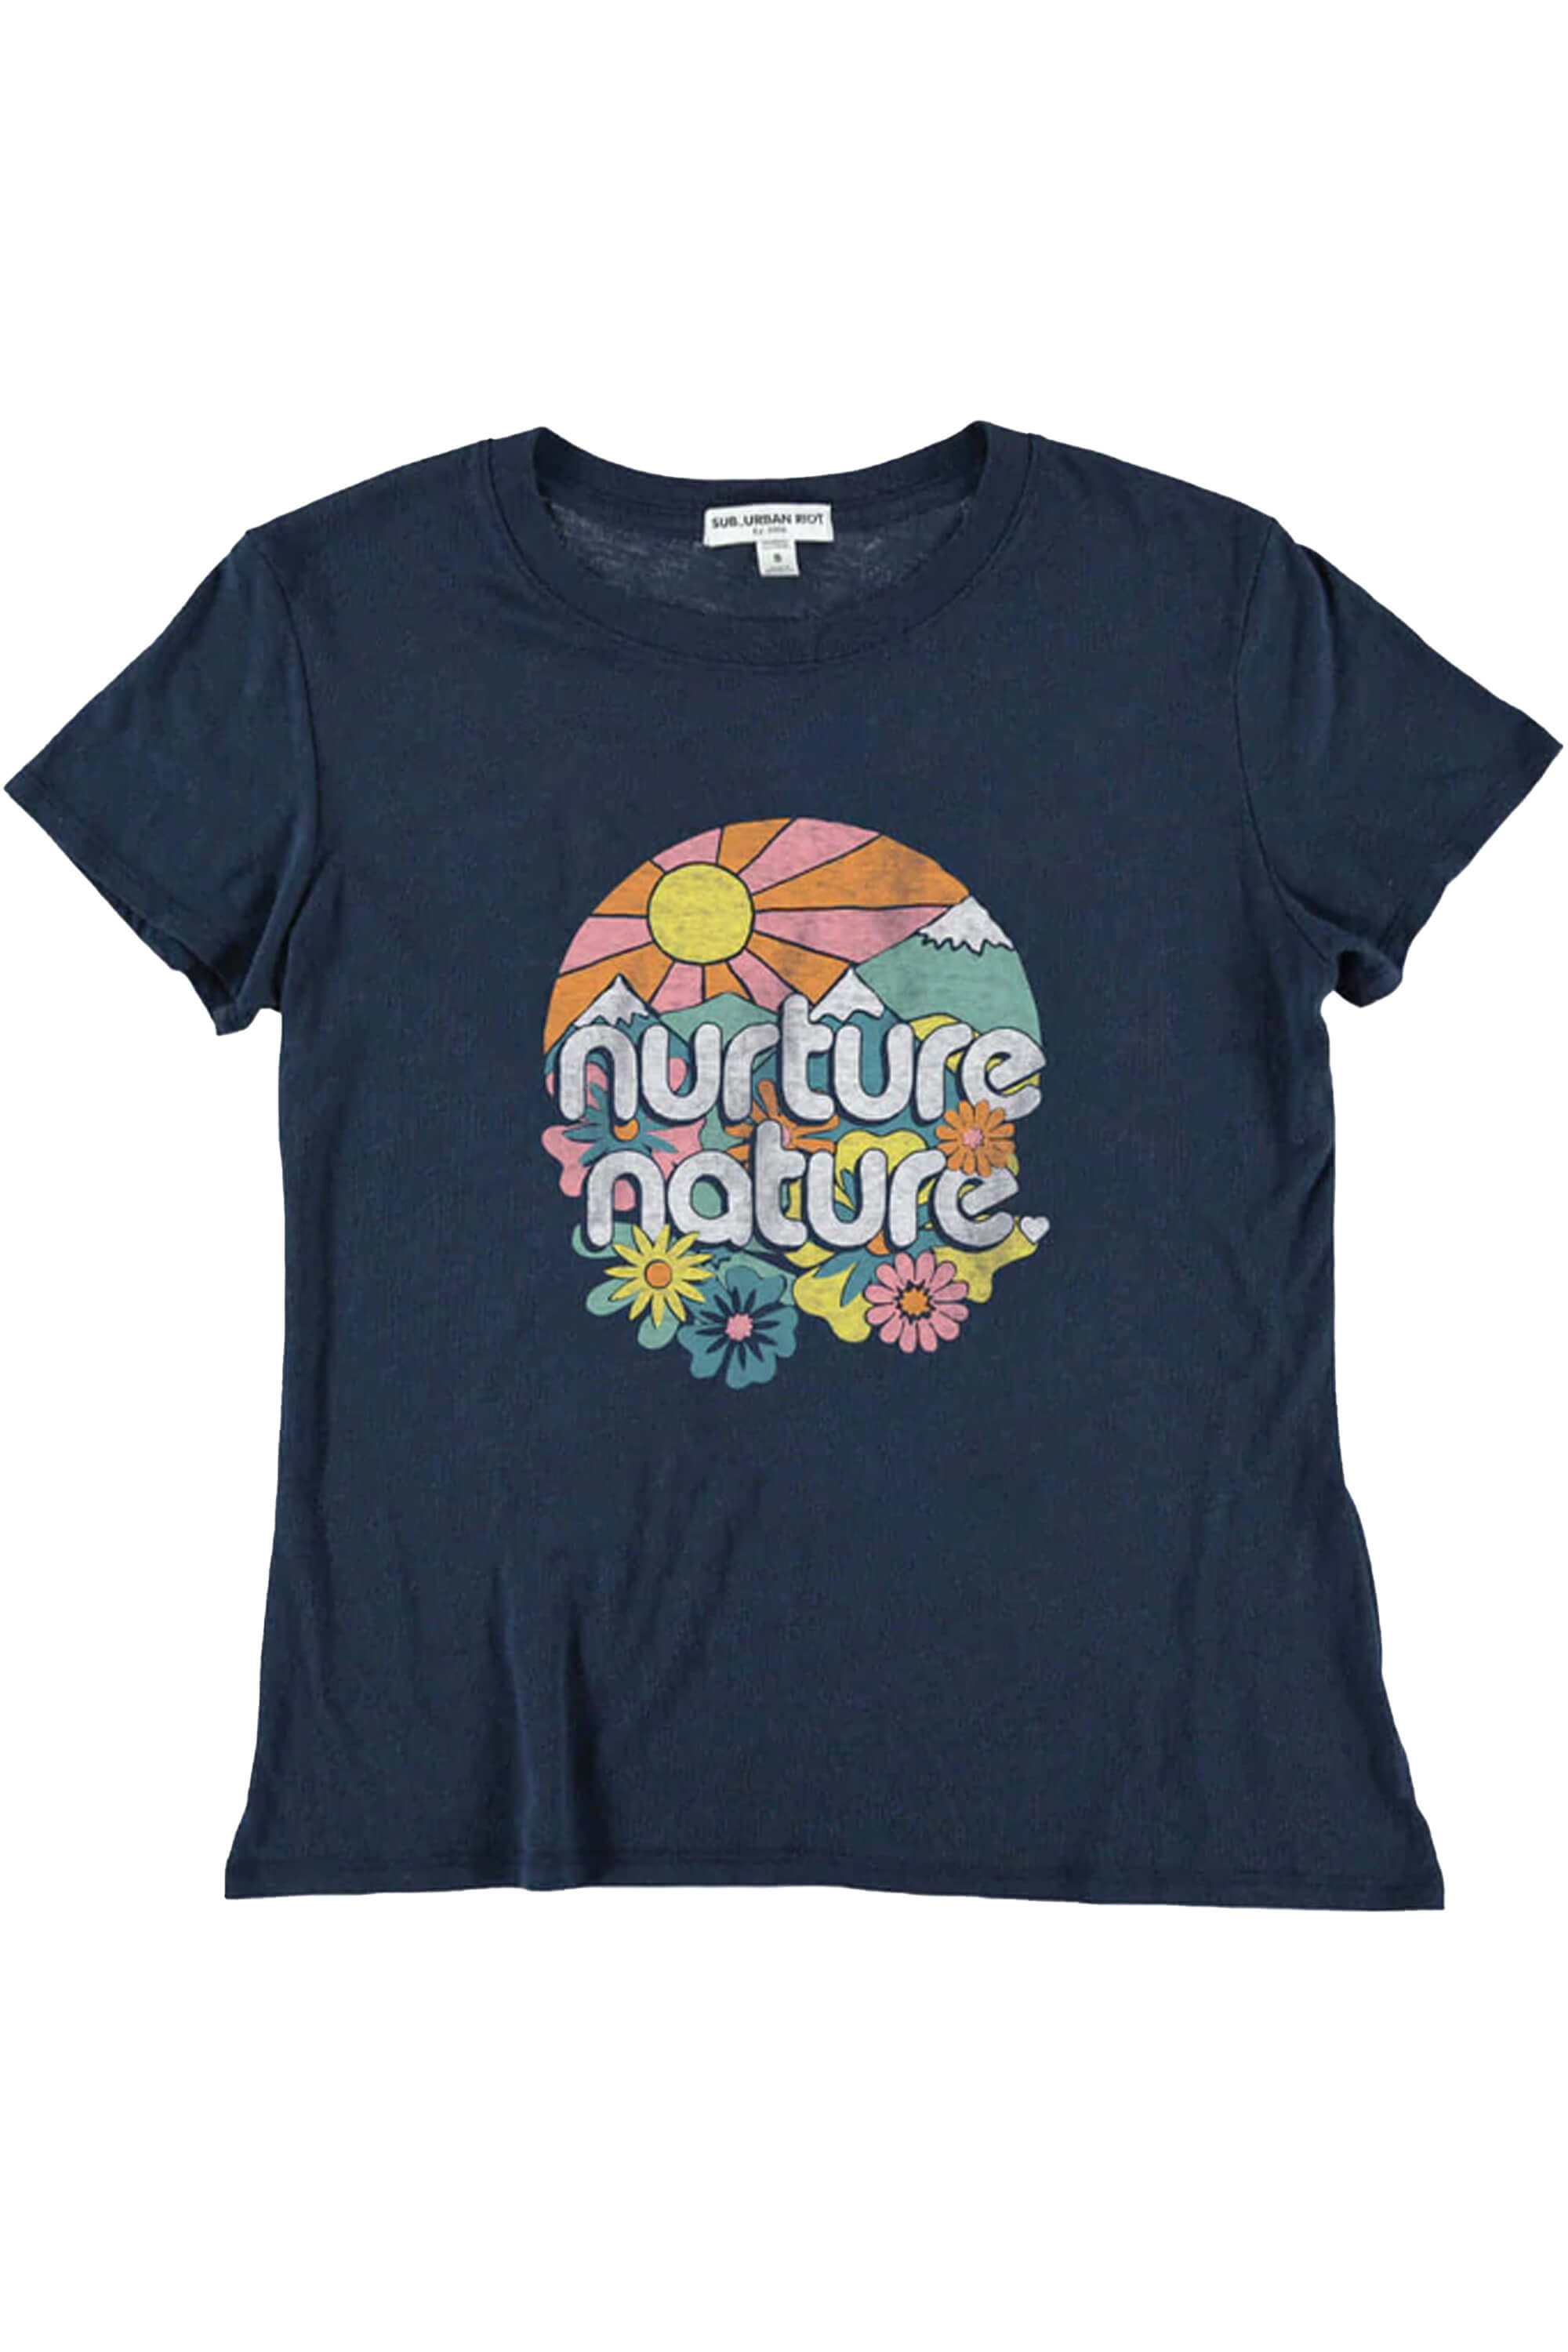 NURTURE NATURE YOUTH SIZE LOOSE TEE